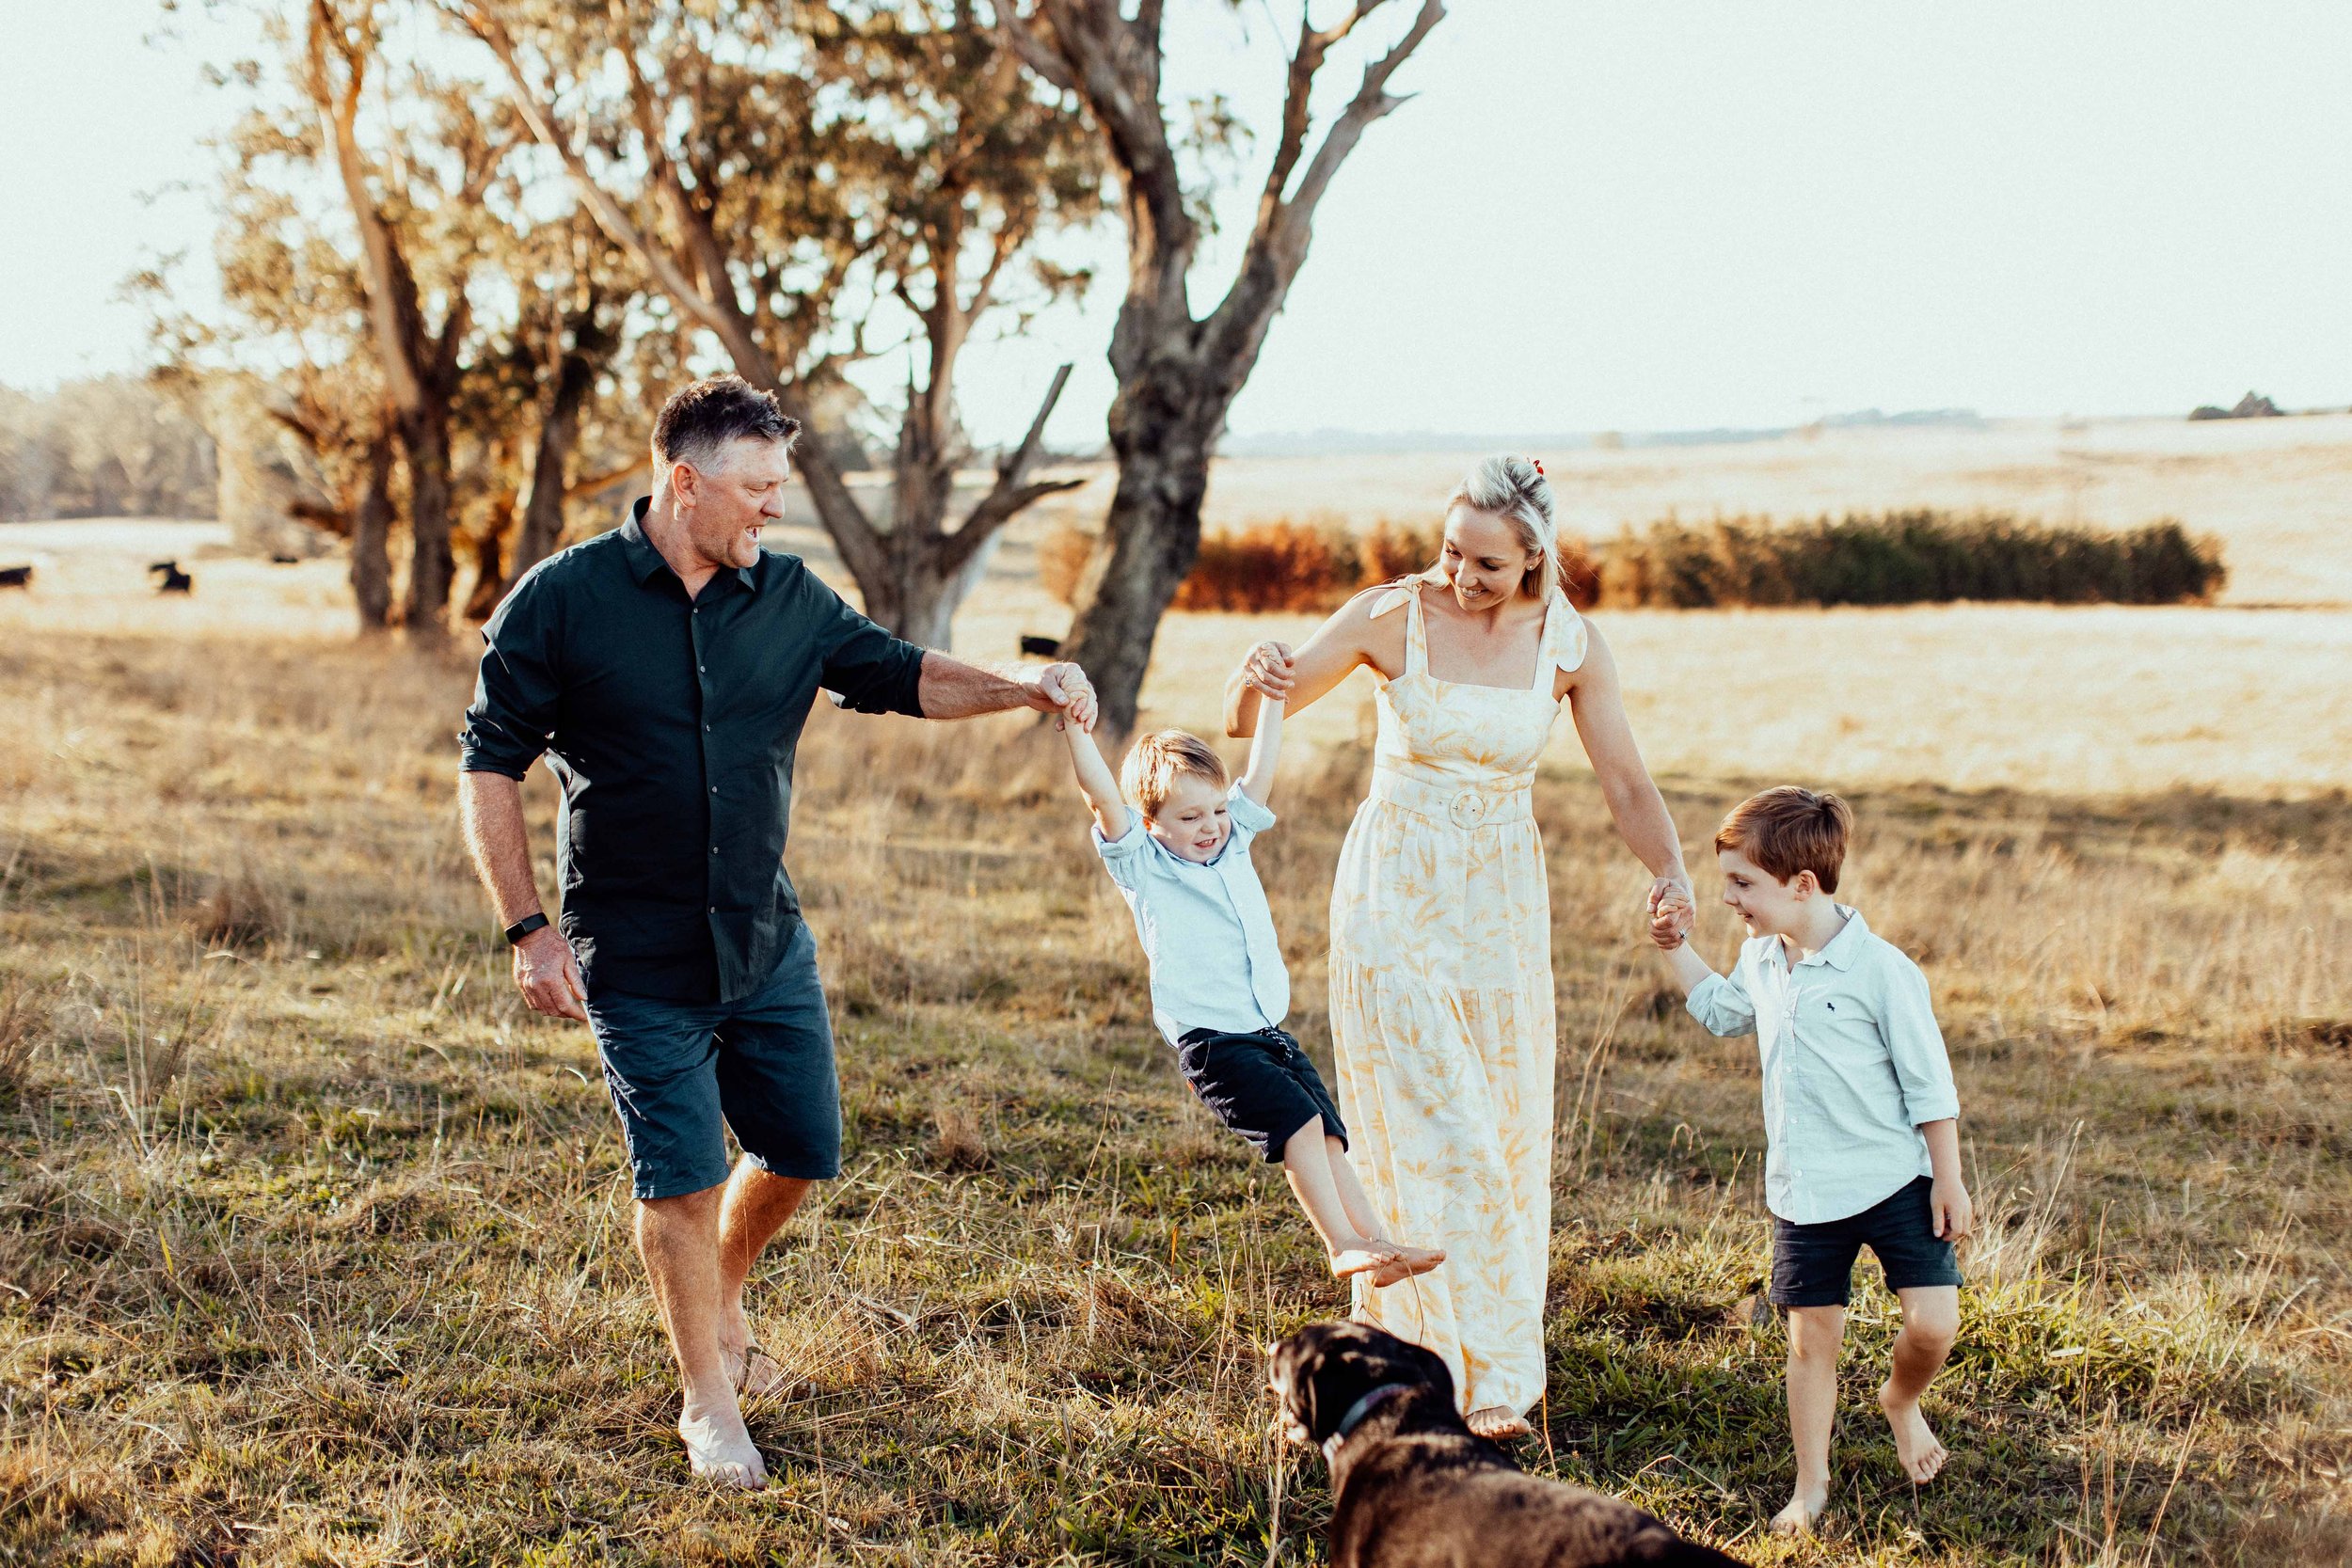 durney-family-exeter-southern-highlands-bowral-inhome-family-lifestyle-wollondilly-camden-macarthur-sydney-photography-www.emilyobrienphotography.net-40.jpg